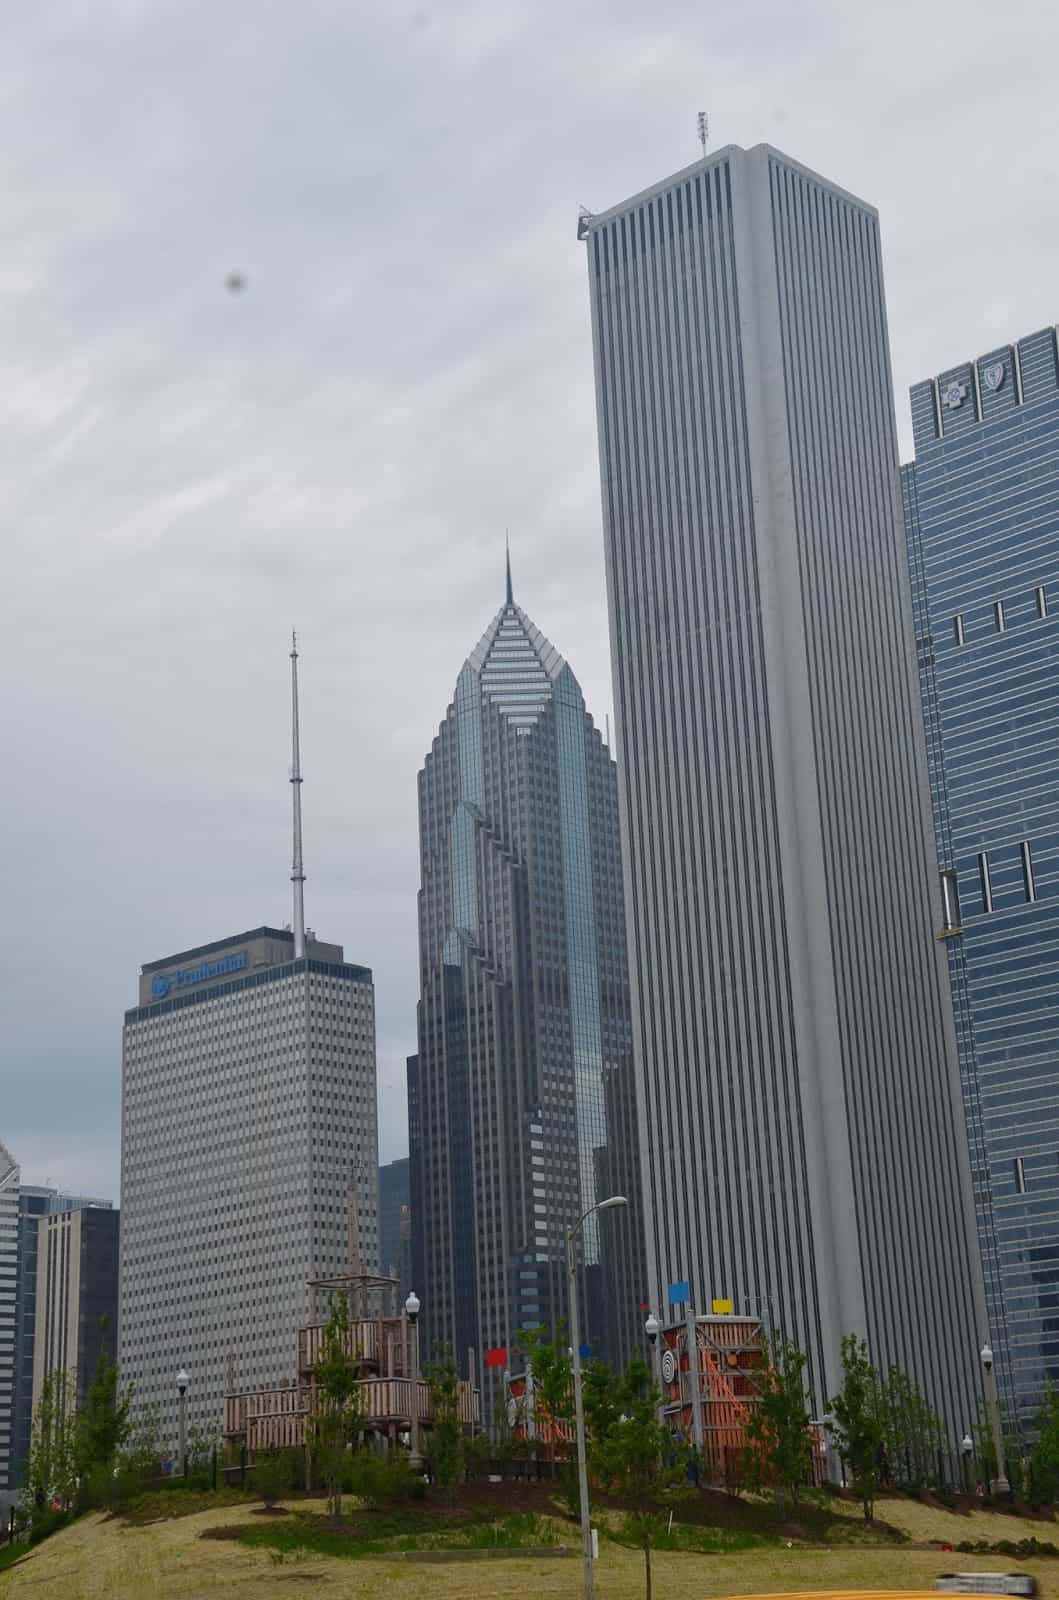 The Prudential (left), Two Prudential Plaza (center) and the Aon Center (right) in Chicago